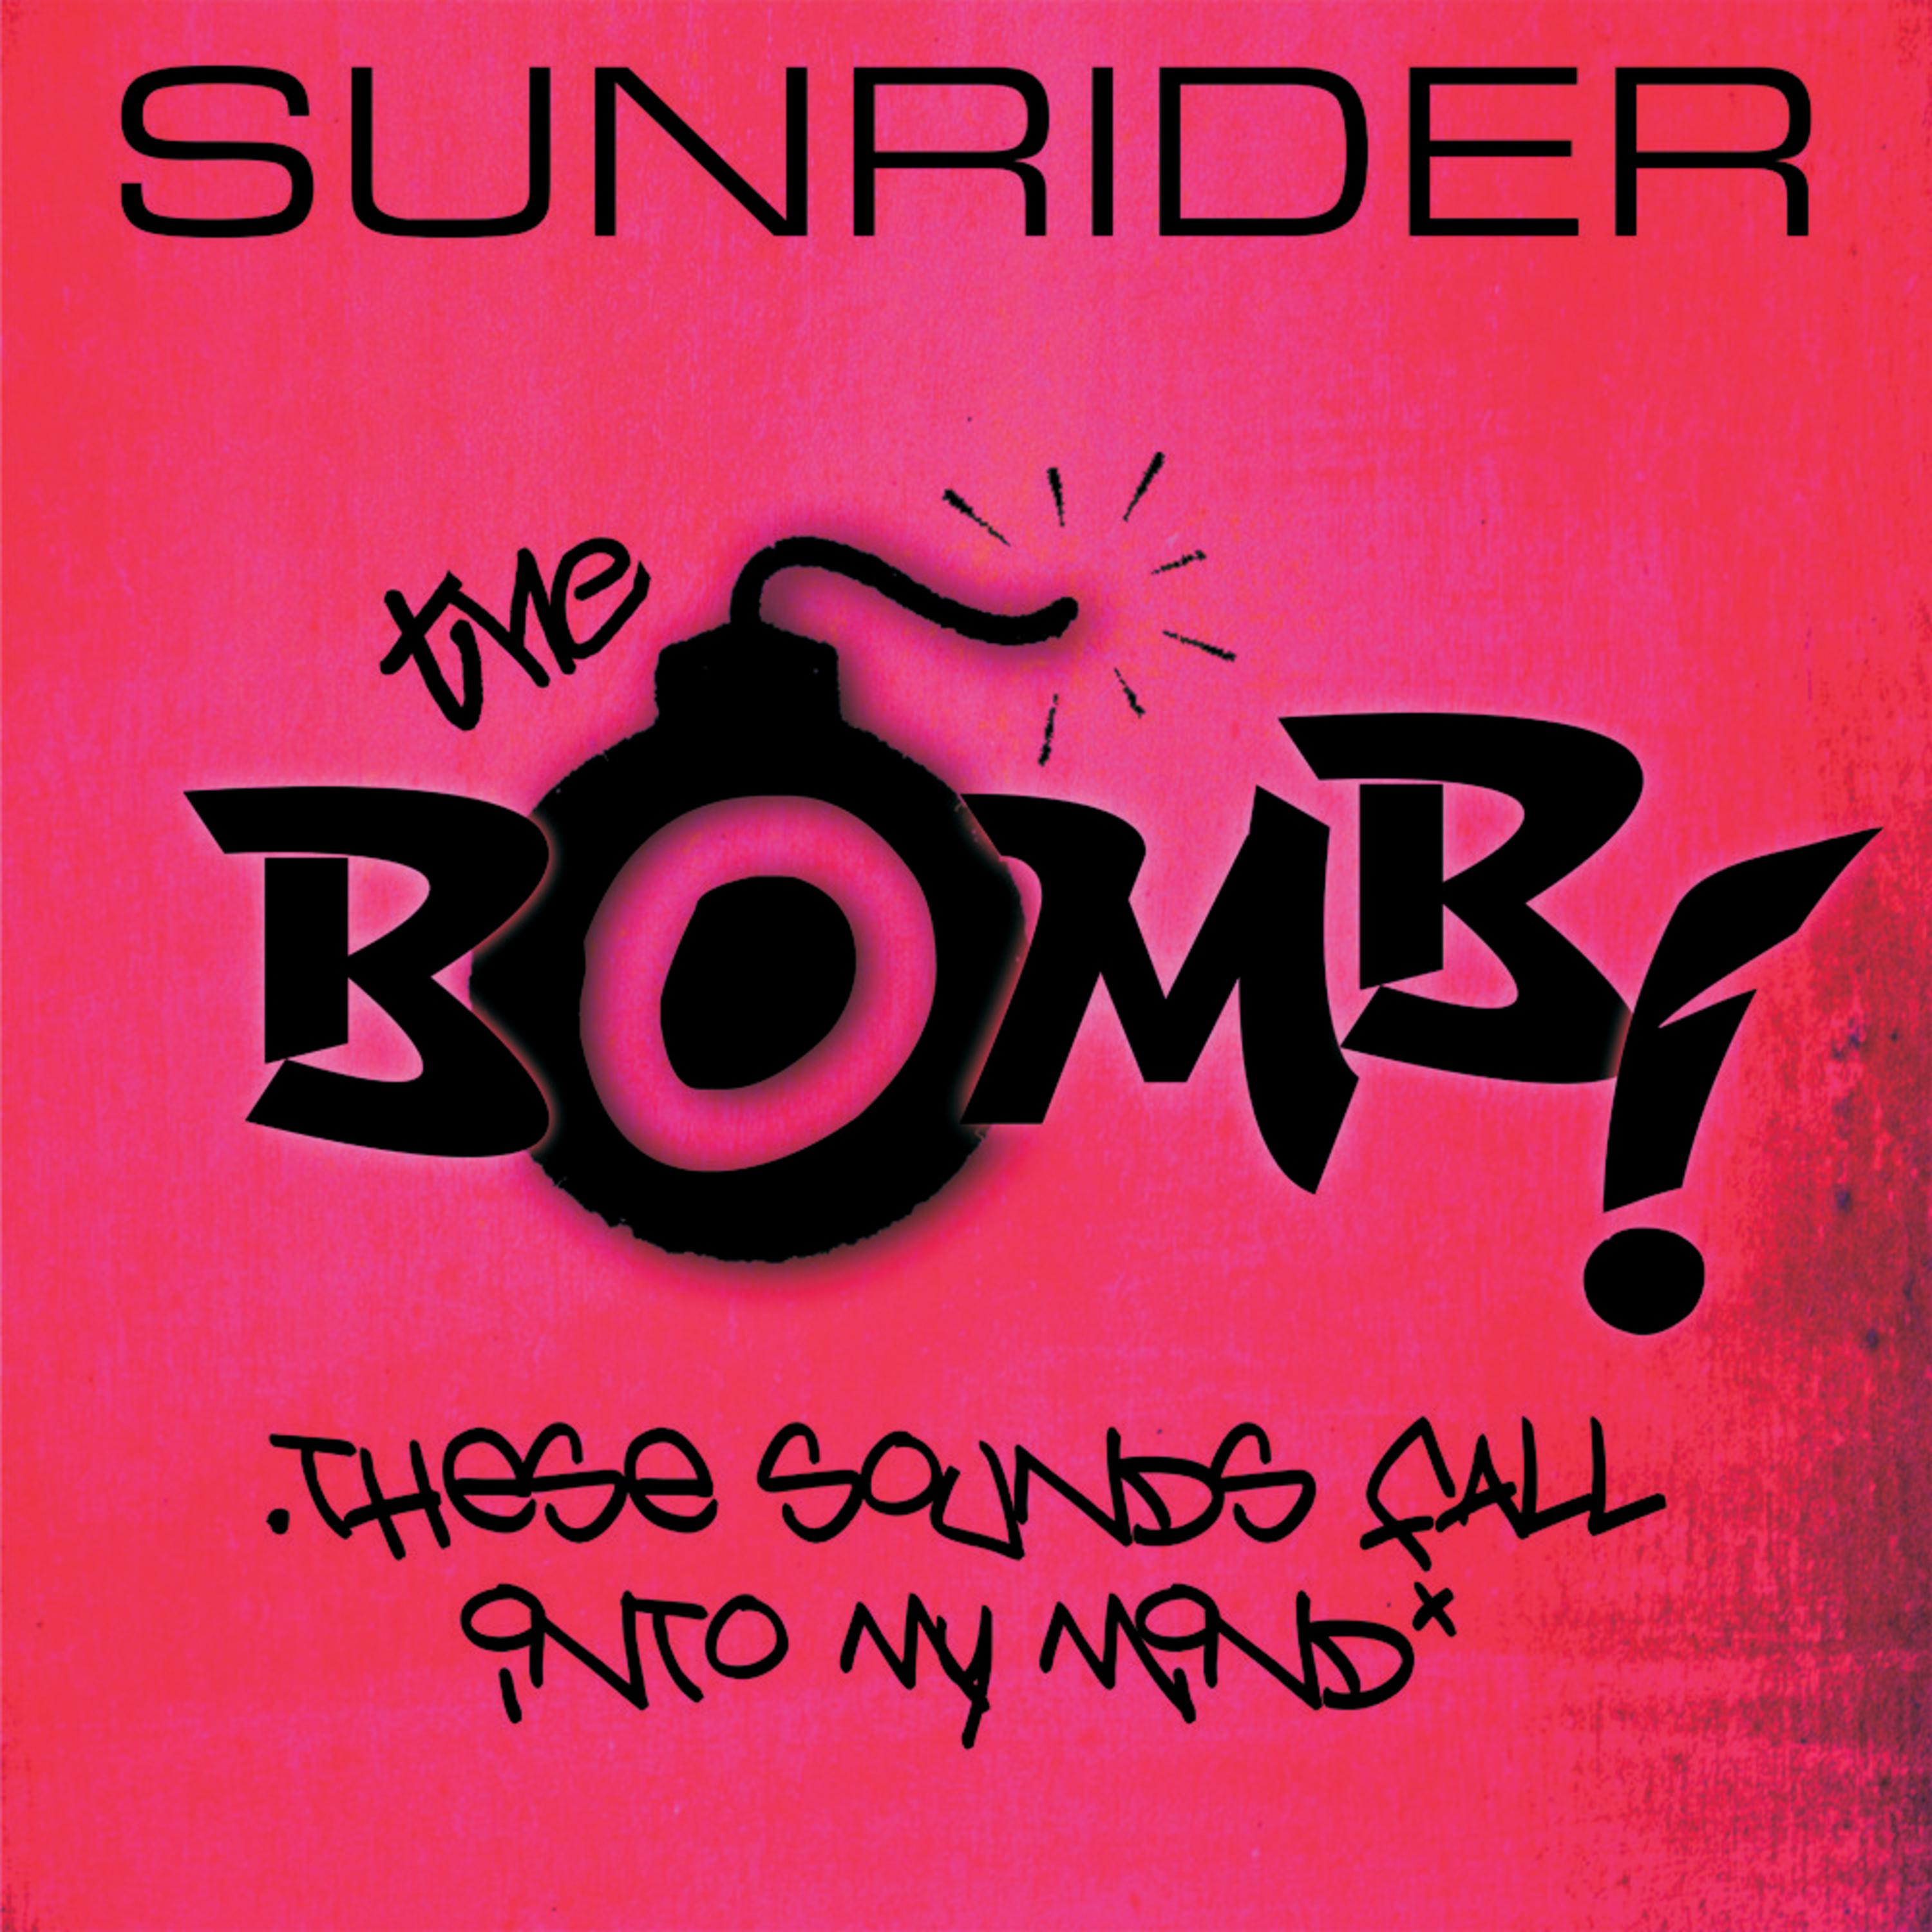 The Bomb (These Sounds Fall Into My Mind) (Electro Mix)